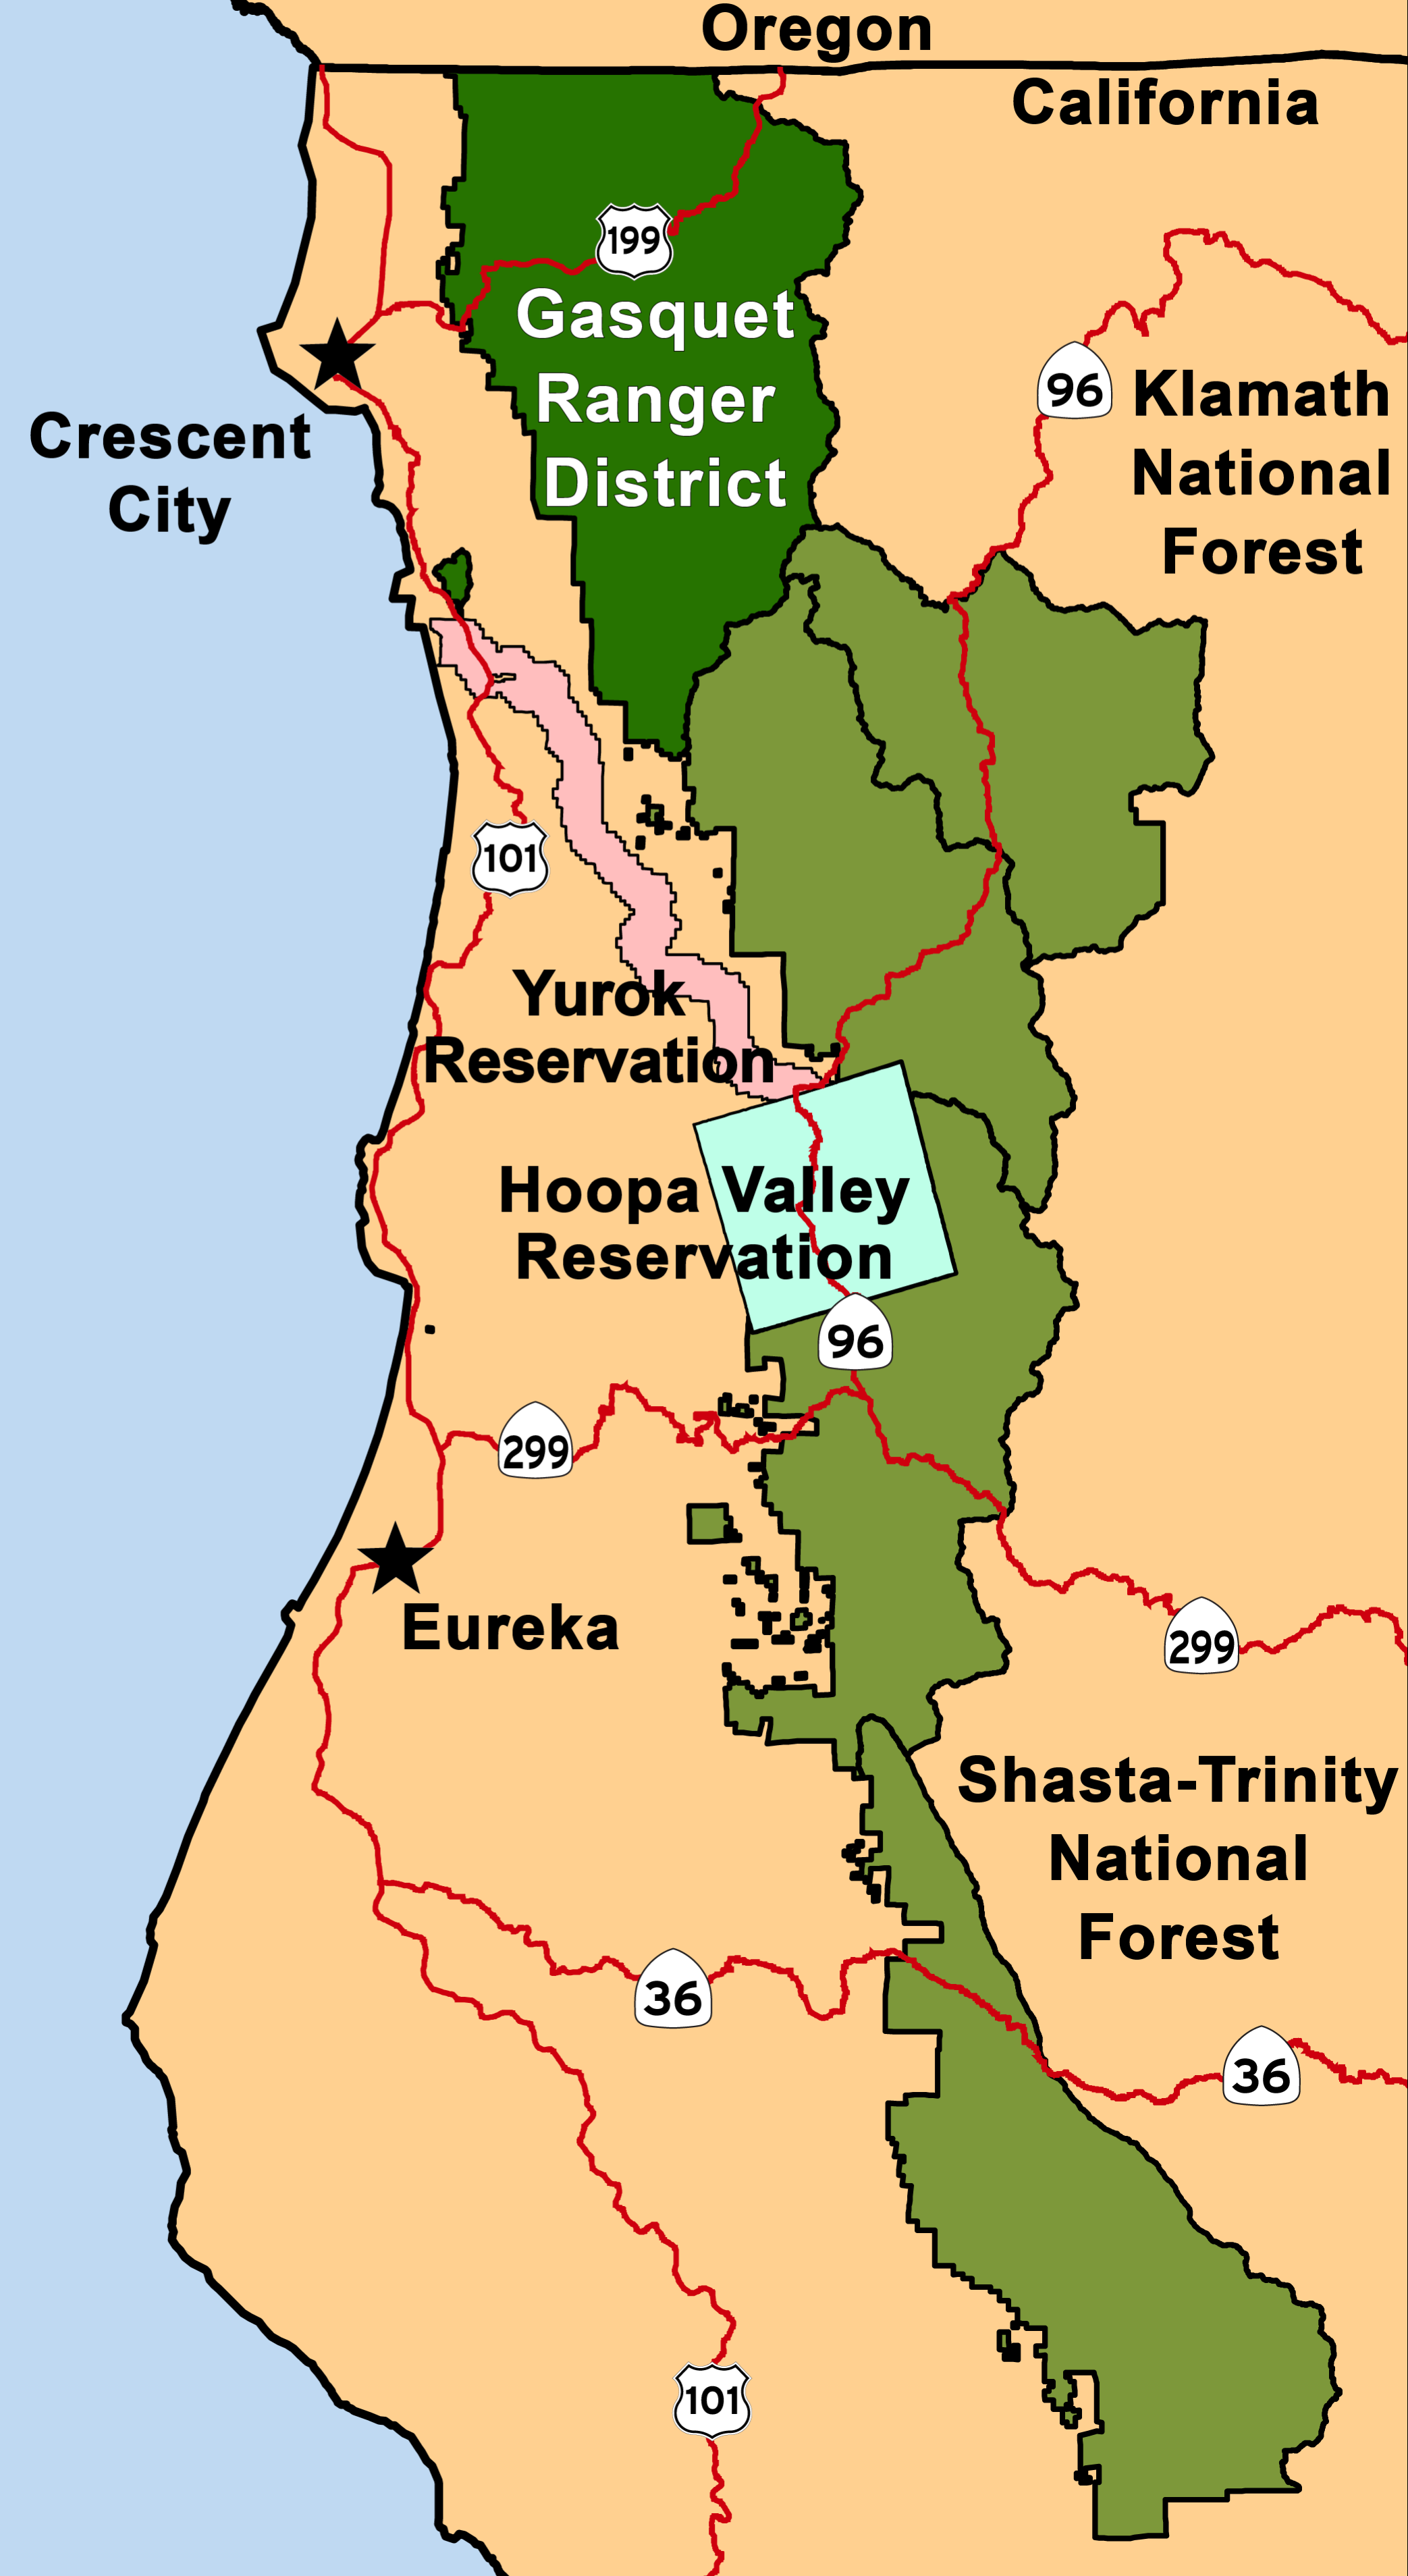 A map of the Six Rivers National Forest highlighting the Gasquet Ranger District